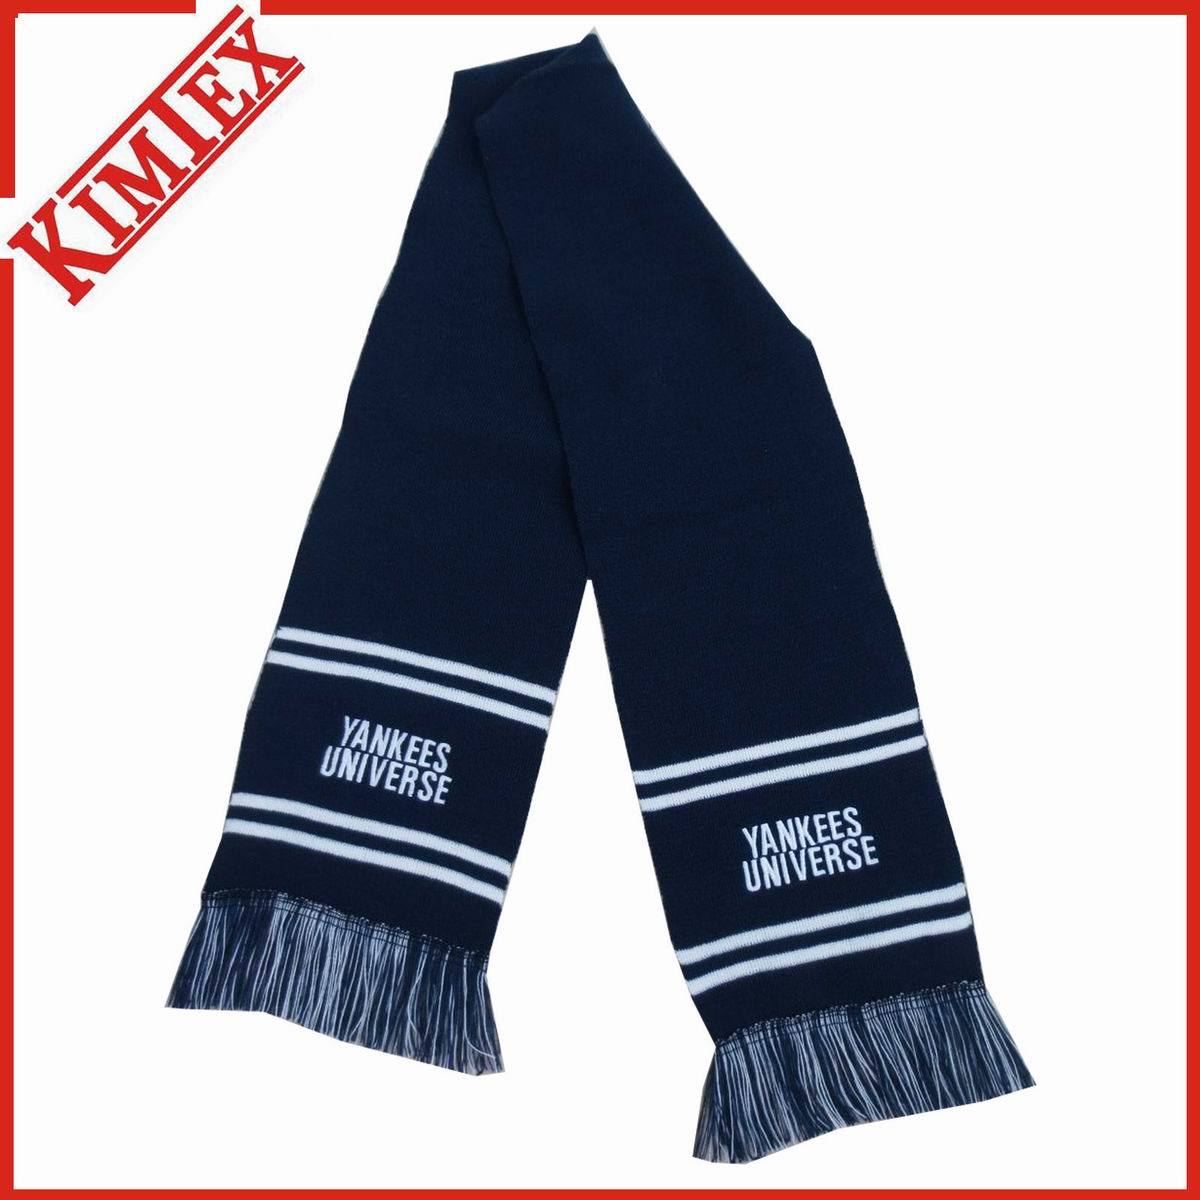 Customized Fashion Acrylic Single Layer Winter Knitted Scarf with Fringes